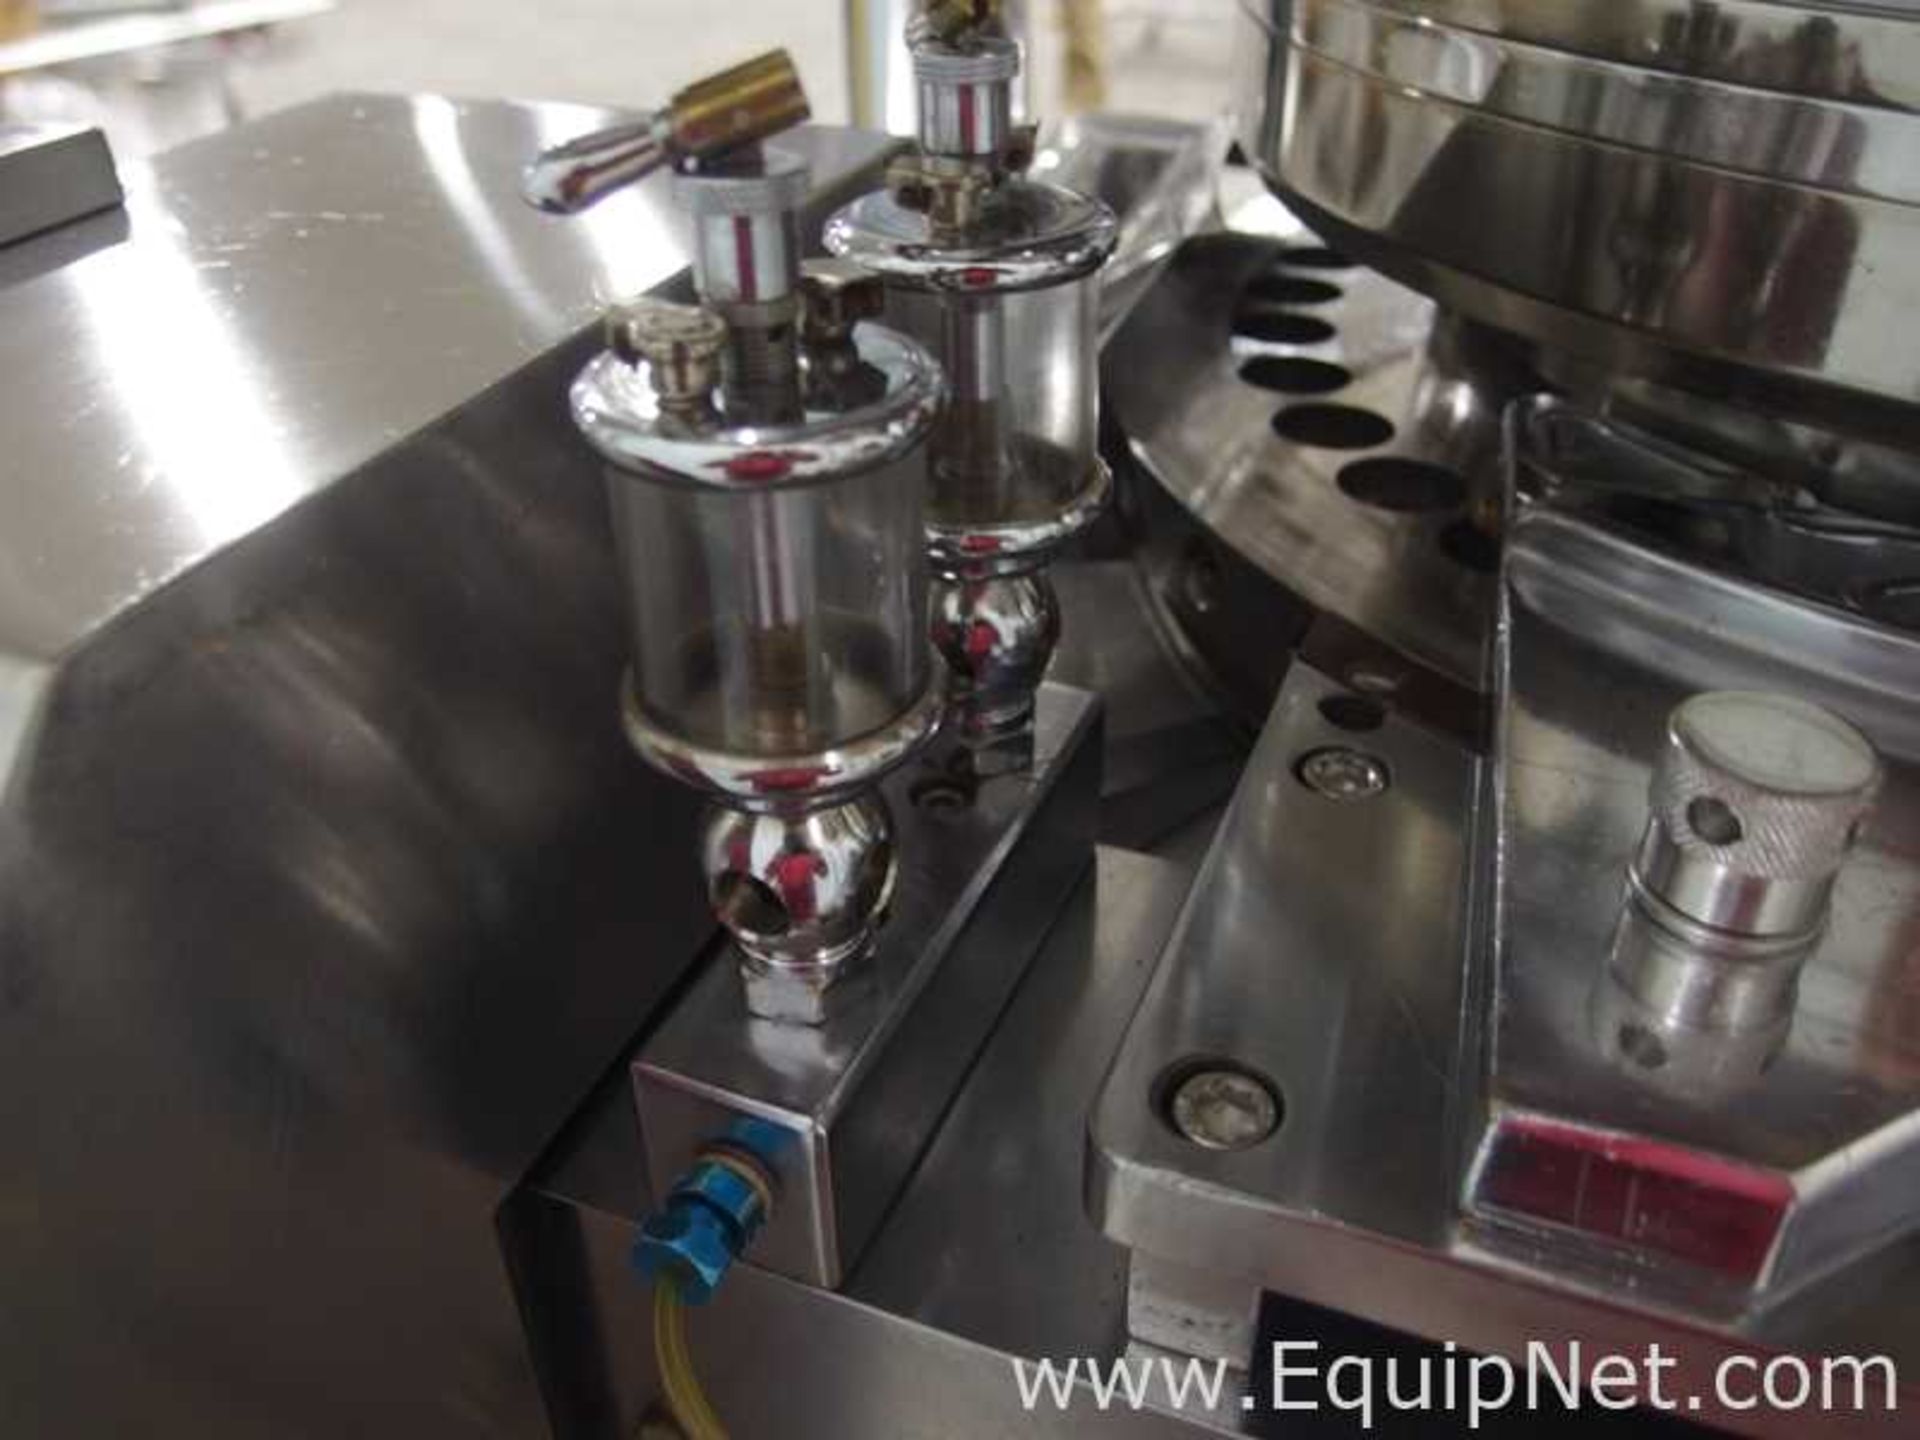 Fluidpack Accura B4 Double Rotary Tablet Press - Image 12 of 18